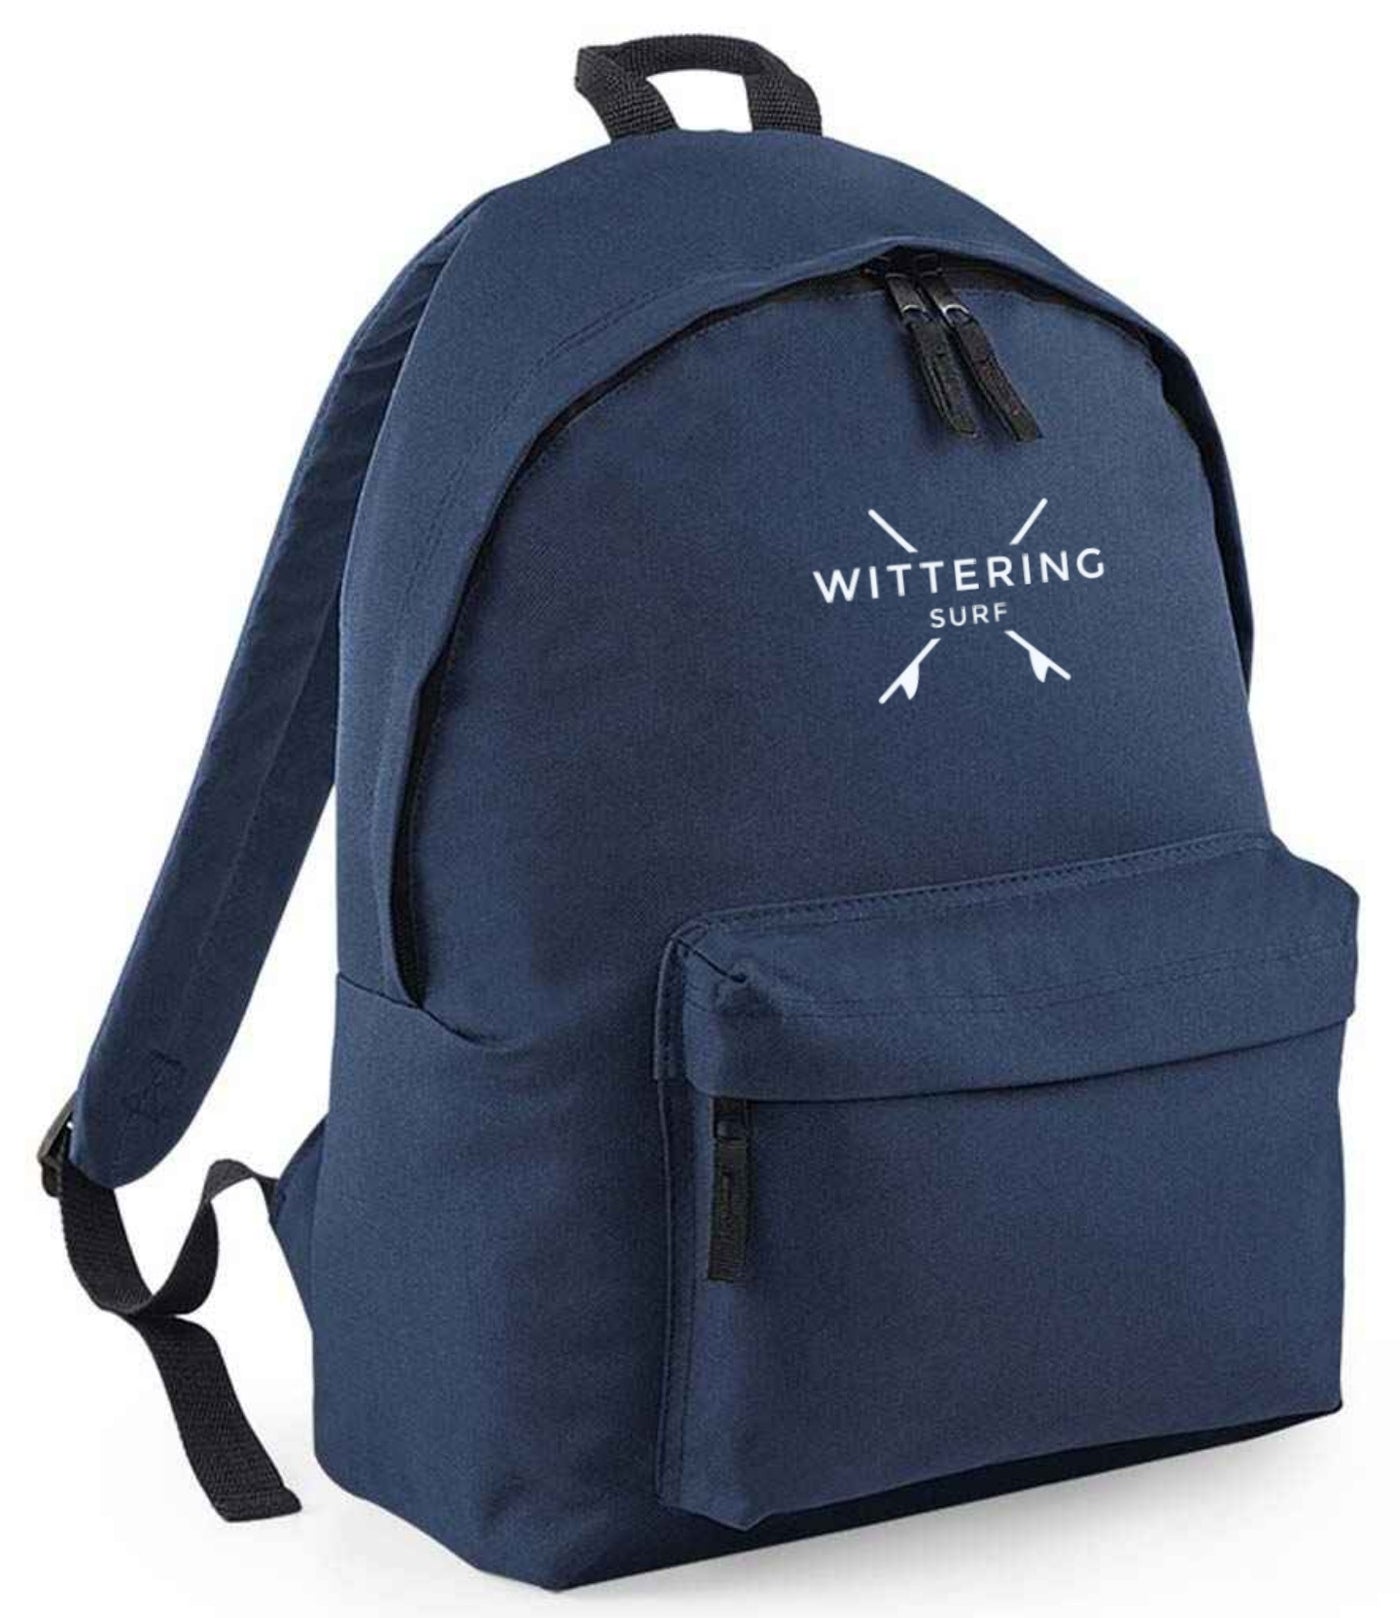 CAMPUS BACKPACK - NAVY